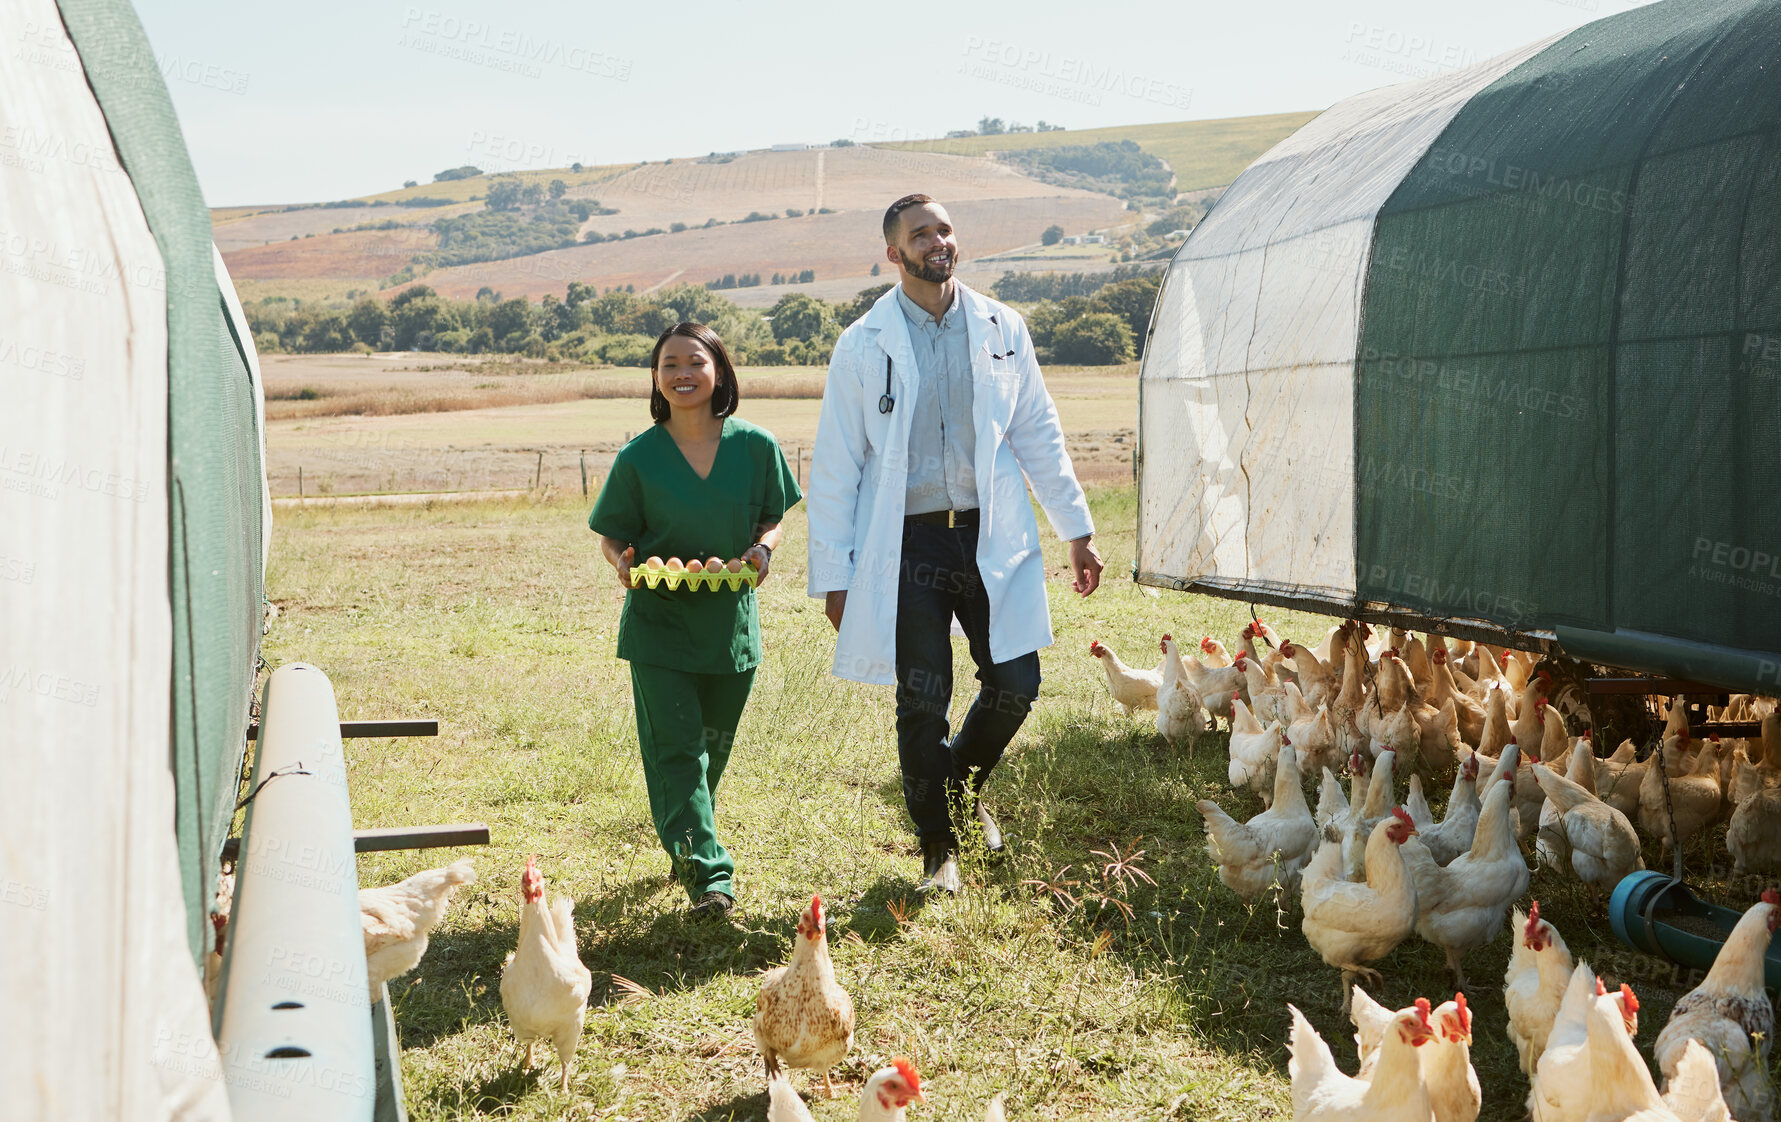 Buy stock photo Farm, vet and chicken with a man and woman medicine team walking on land for agriculture or livestock. Eggs, healthcare and veterinarian on a farming field for sustainability or healthy produce